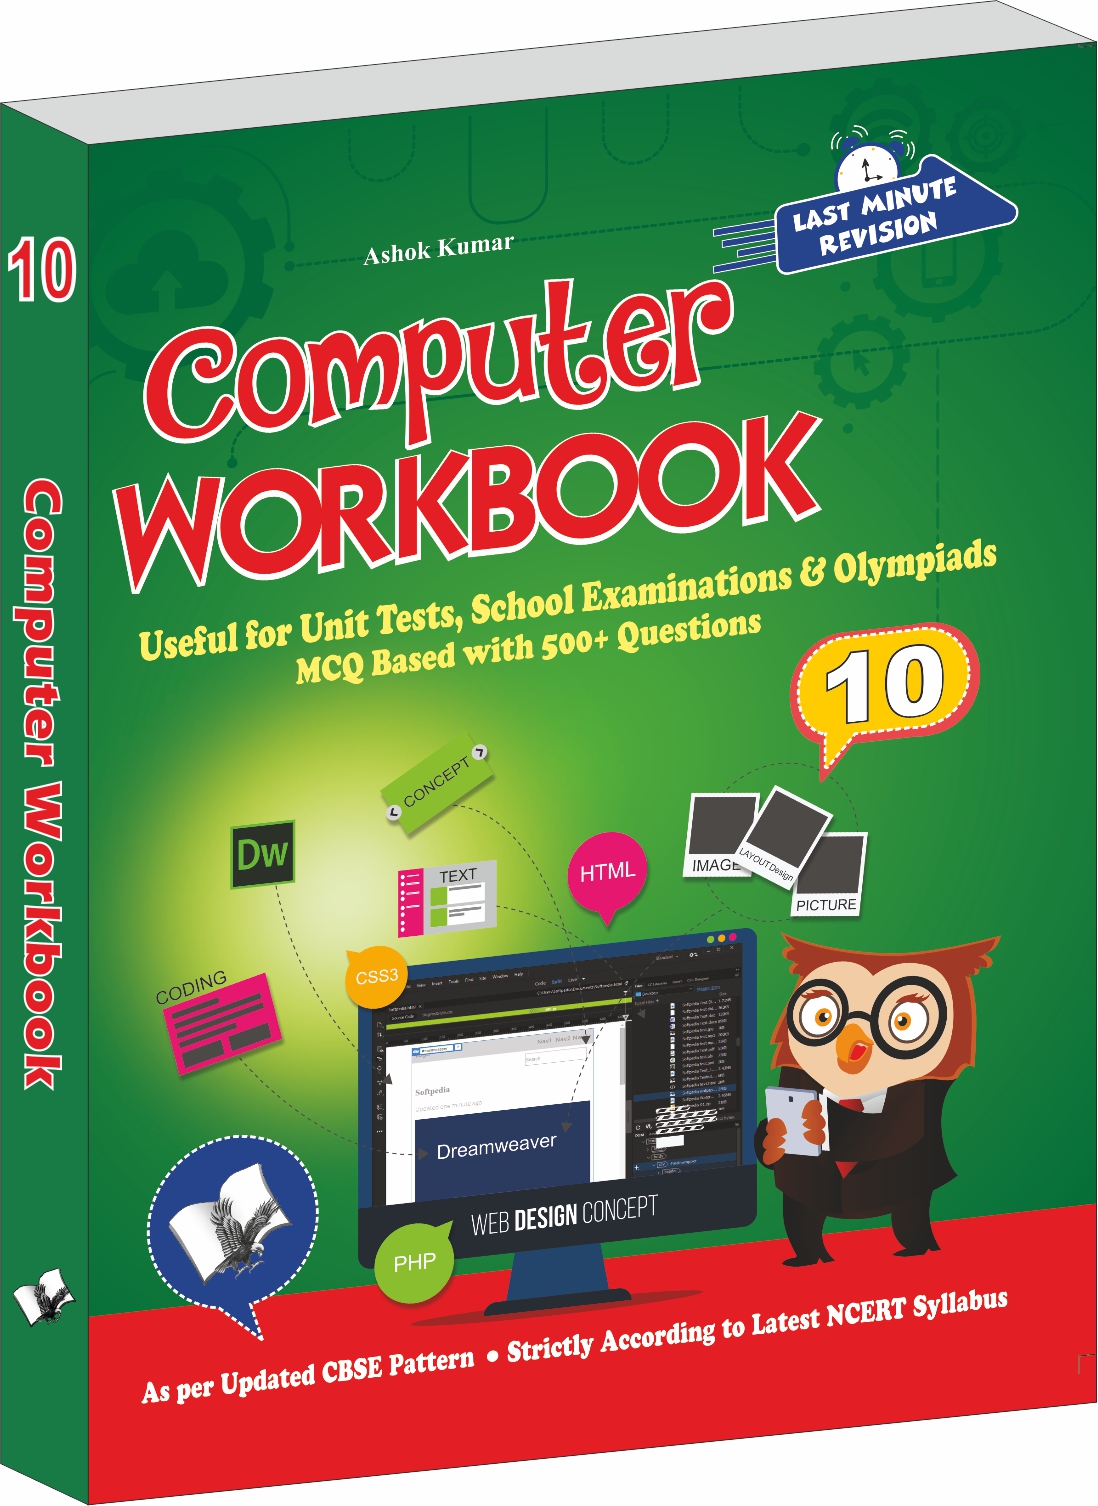 computer-workbook-class-10-useful-for-unit-tests-school-examinations-olympiads